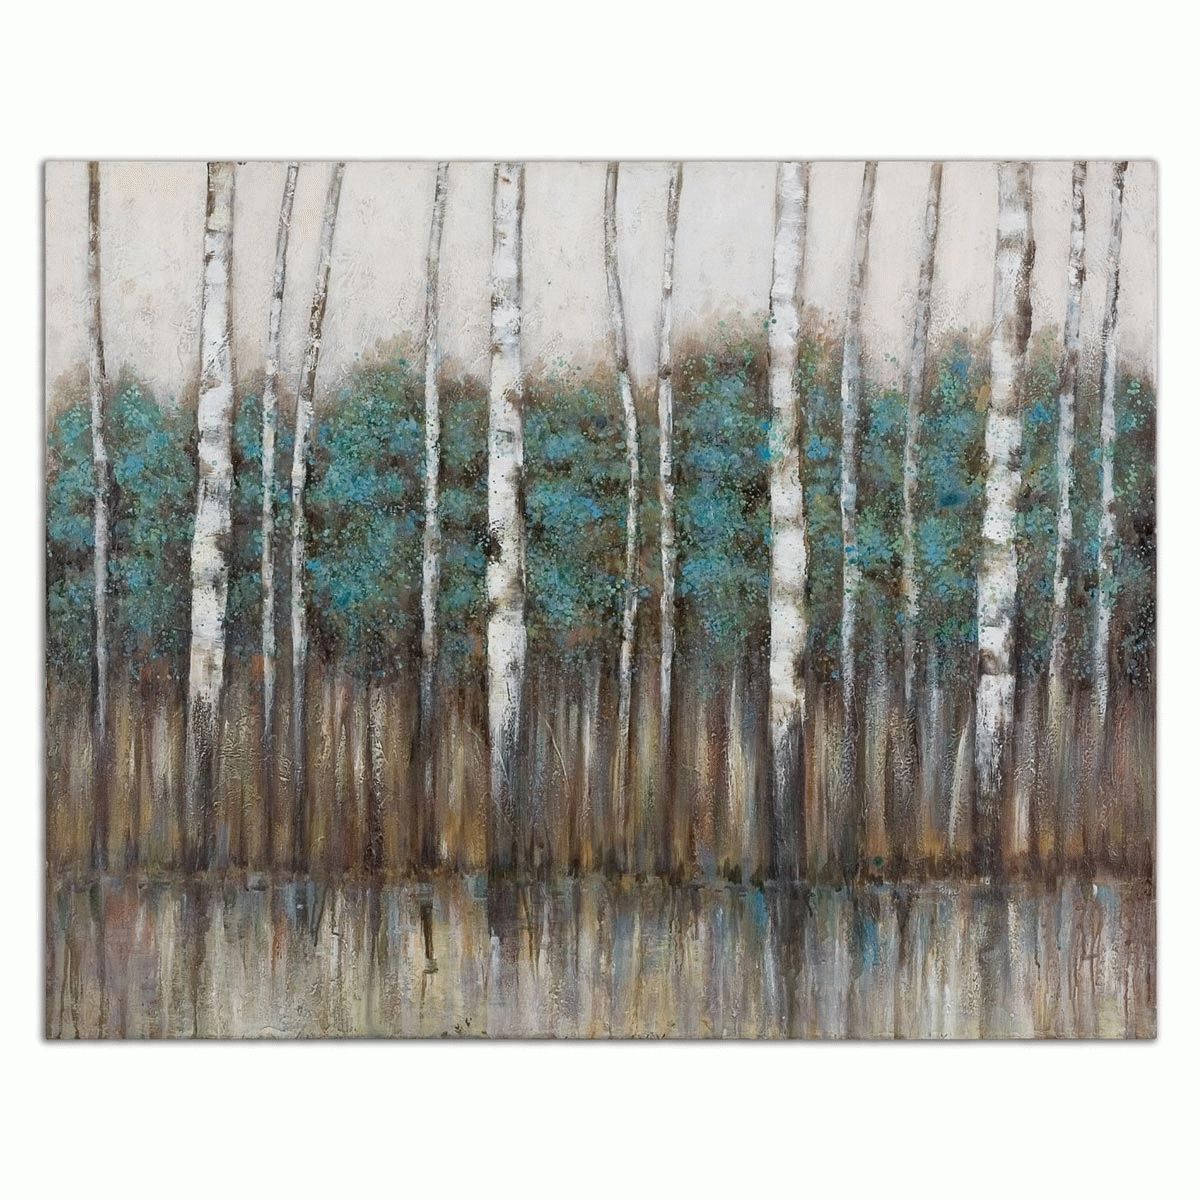 Edge Of The Forest Canvas Wall Art Regarding Teal And Black Wall Art (View 16 of 20)